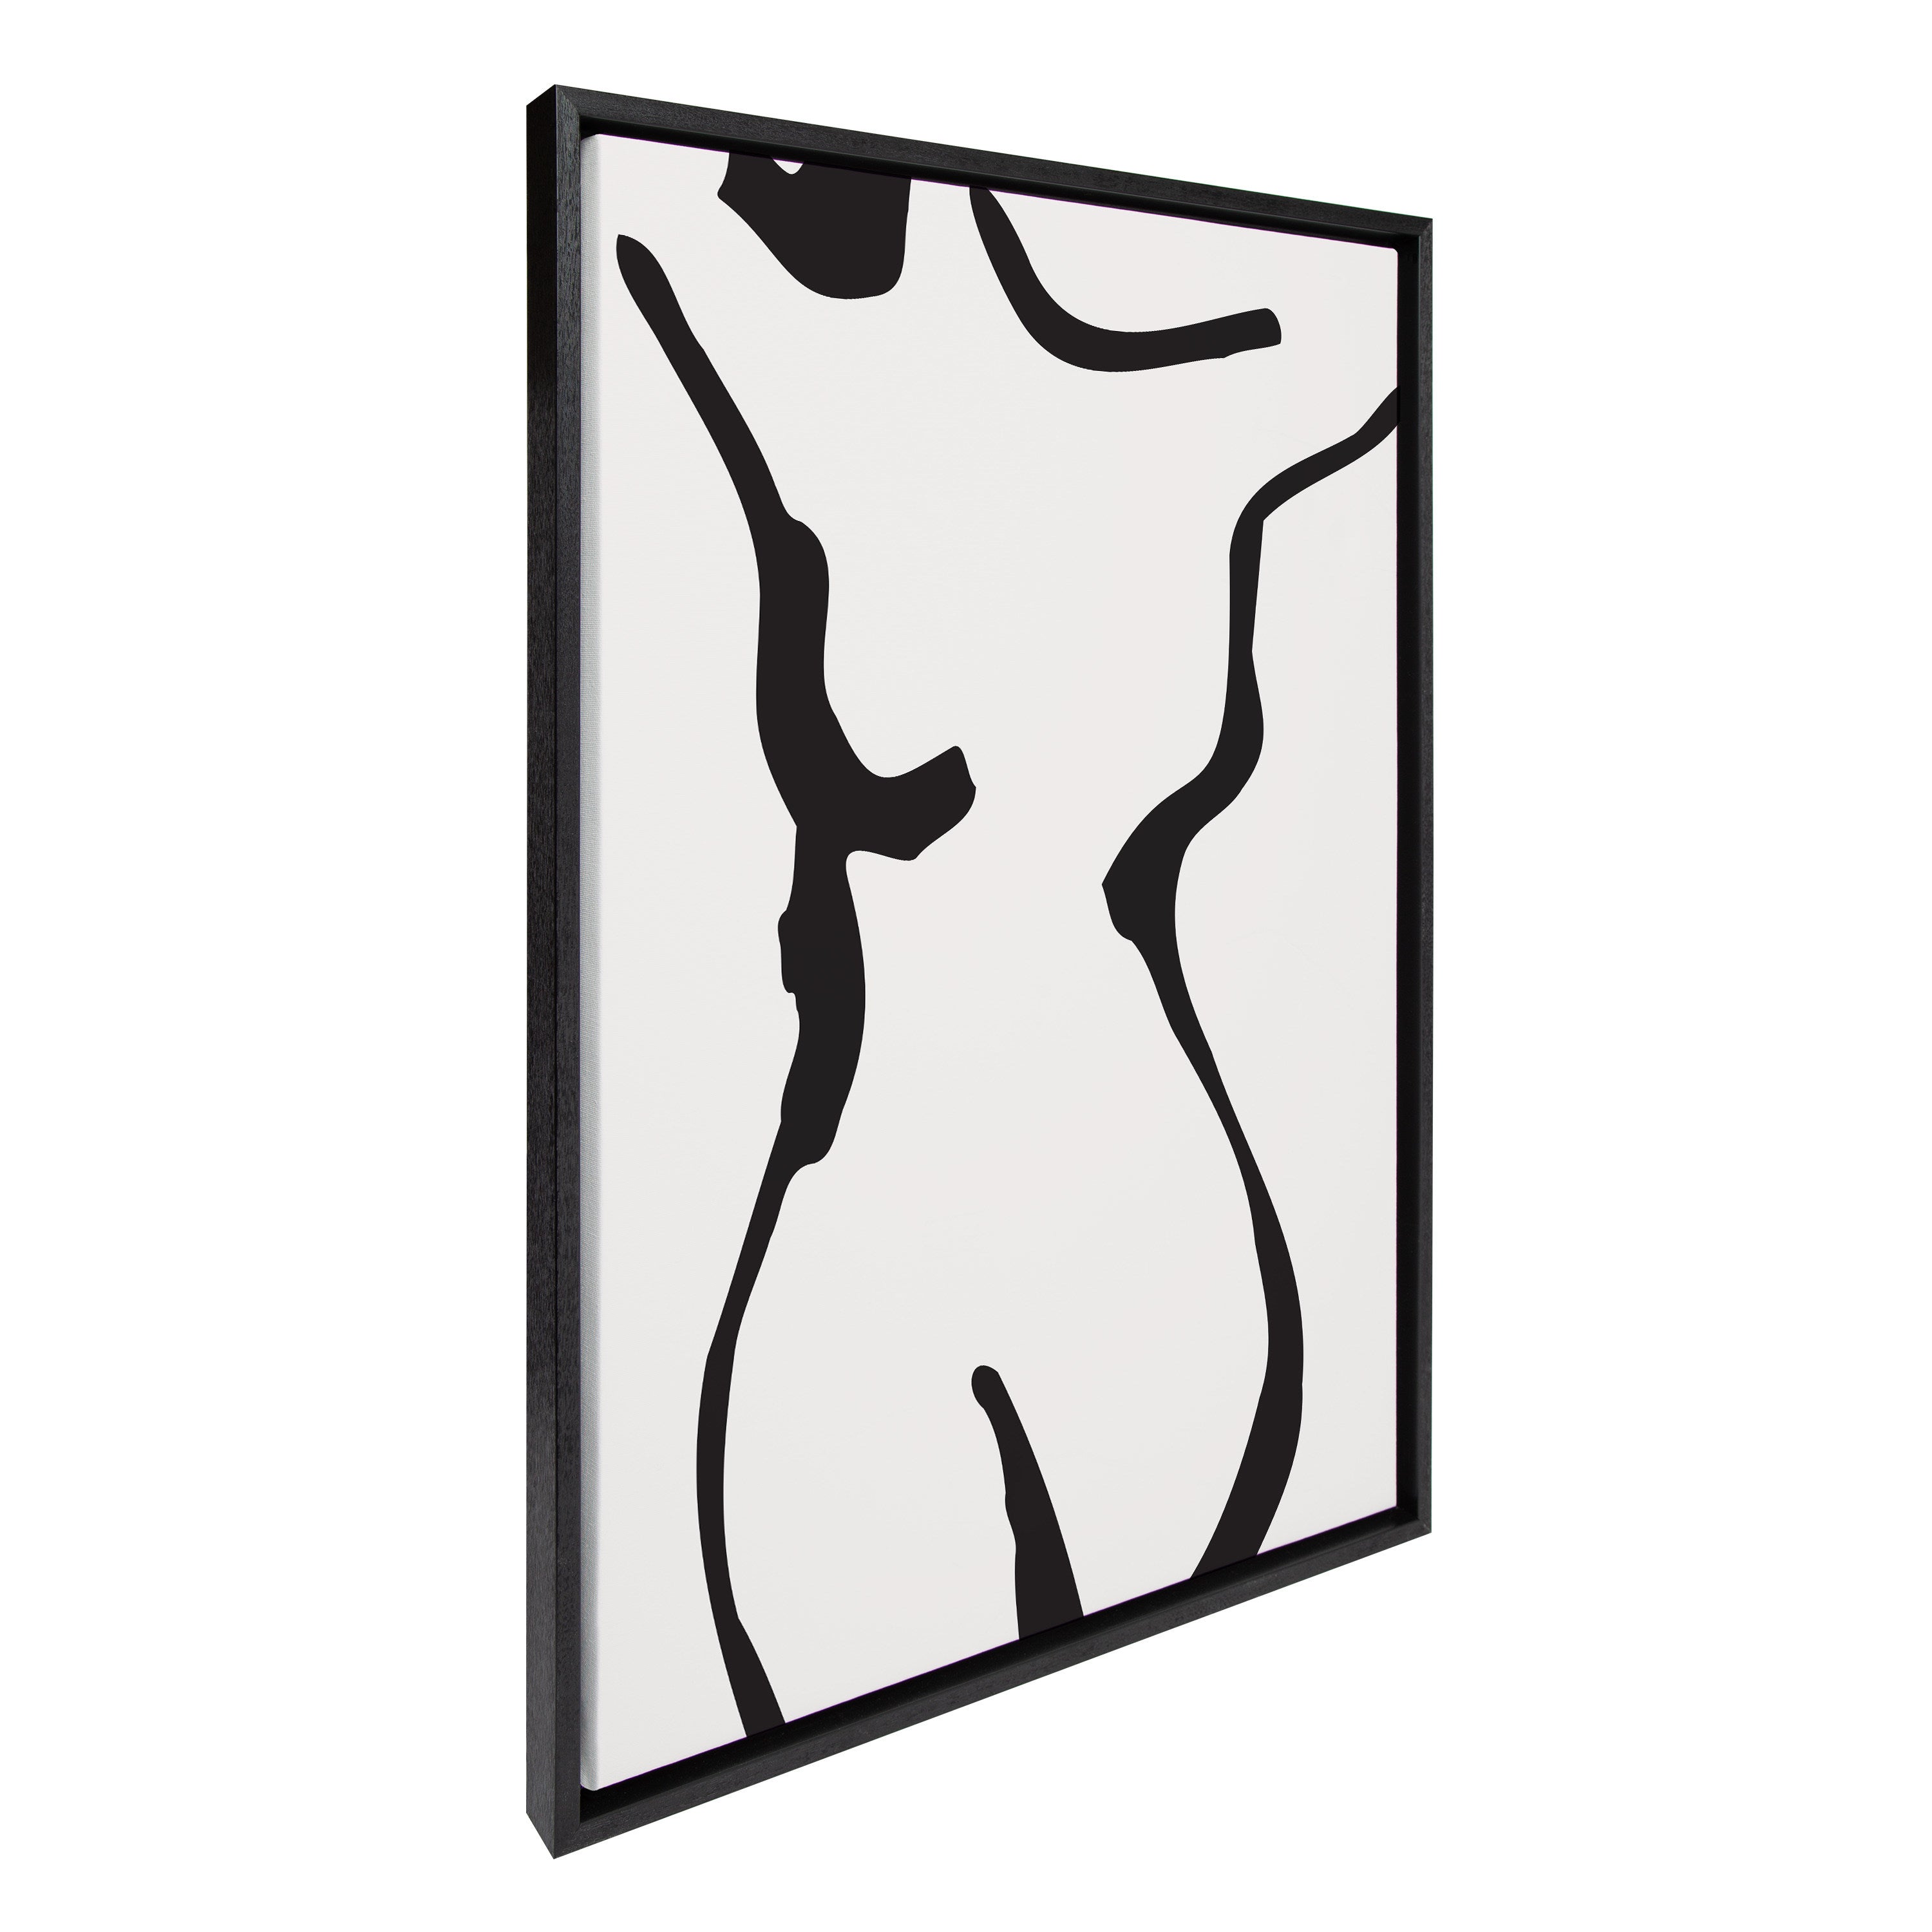 Sylvie Timeless Feminine Figural Drawing 1 Black and White Framed Canvas by The Creative Bunch Studio